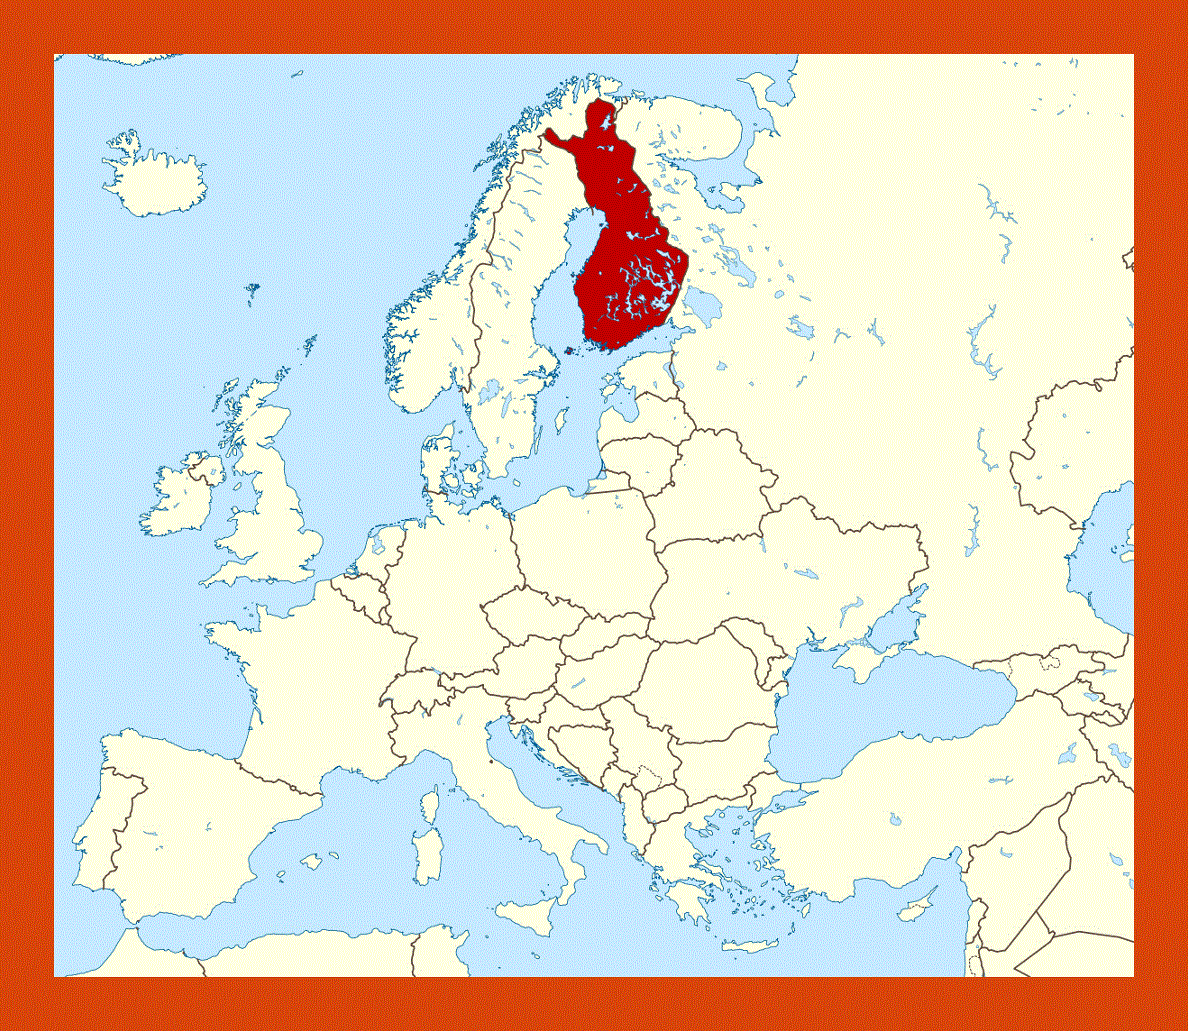 Location map of Finland